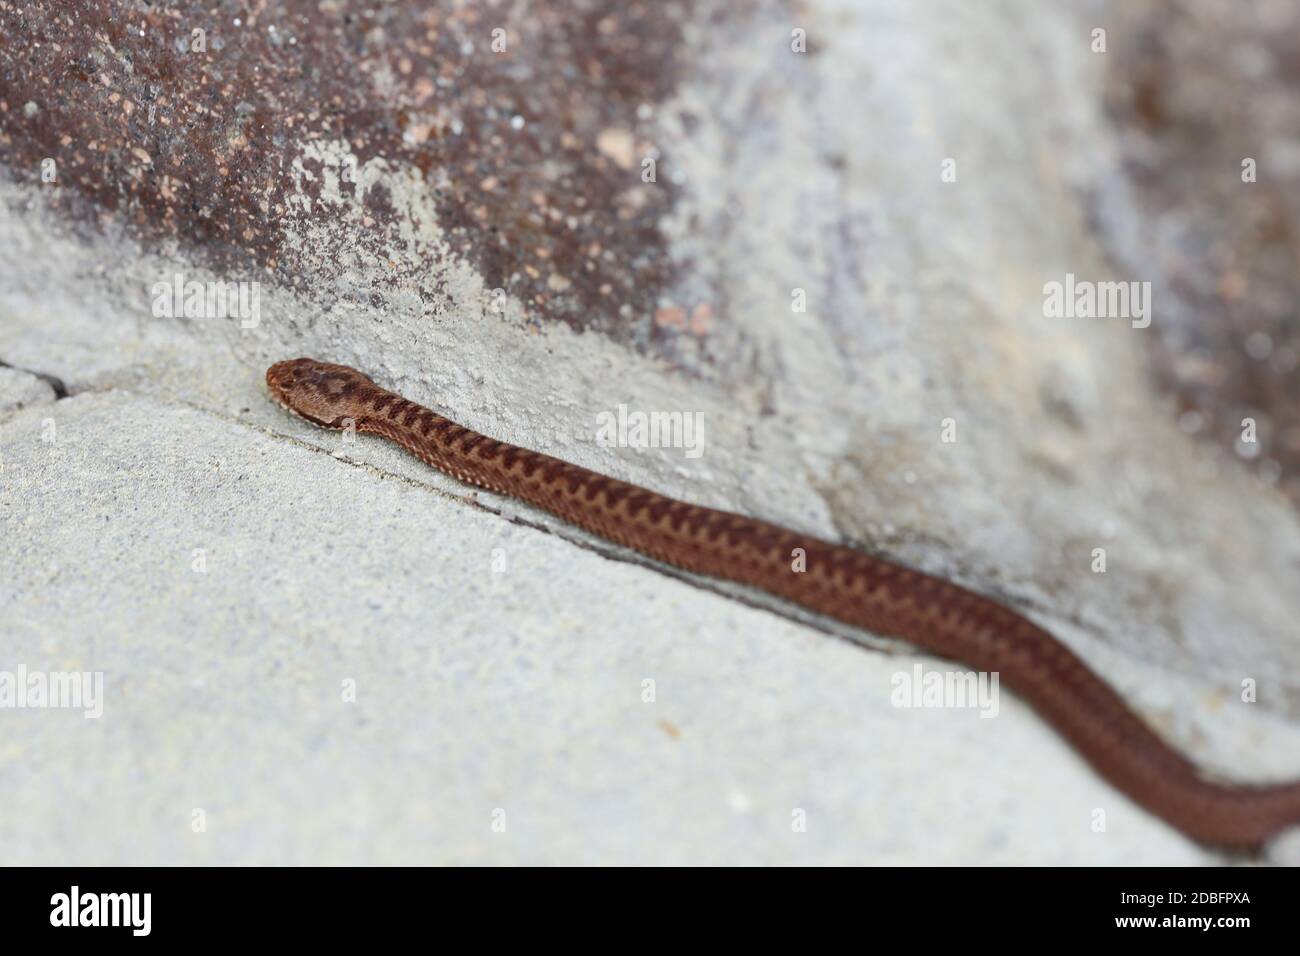 a little brown poison adder on the ground Stock Photo